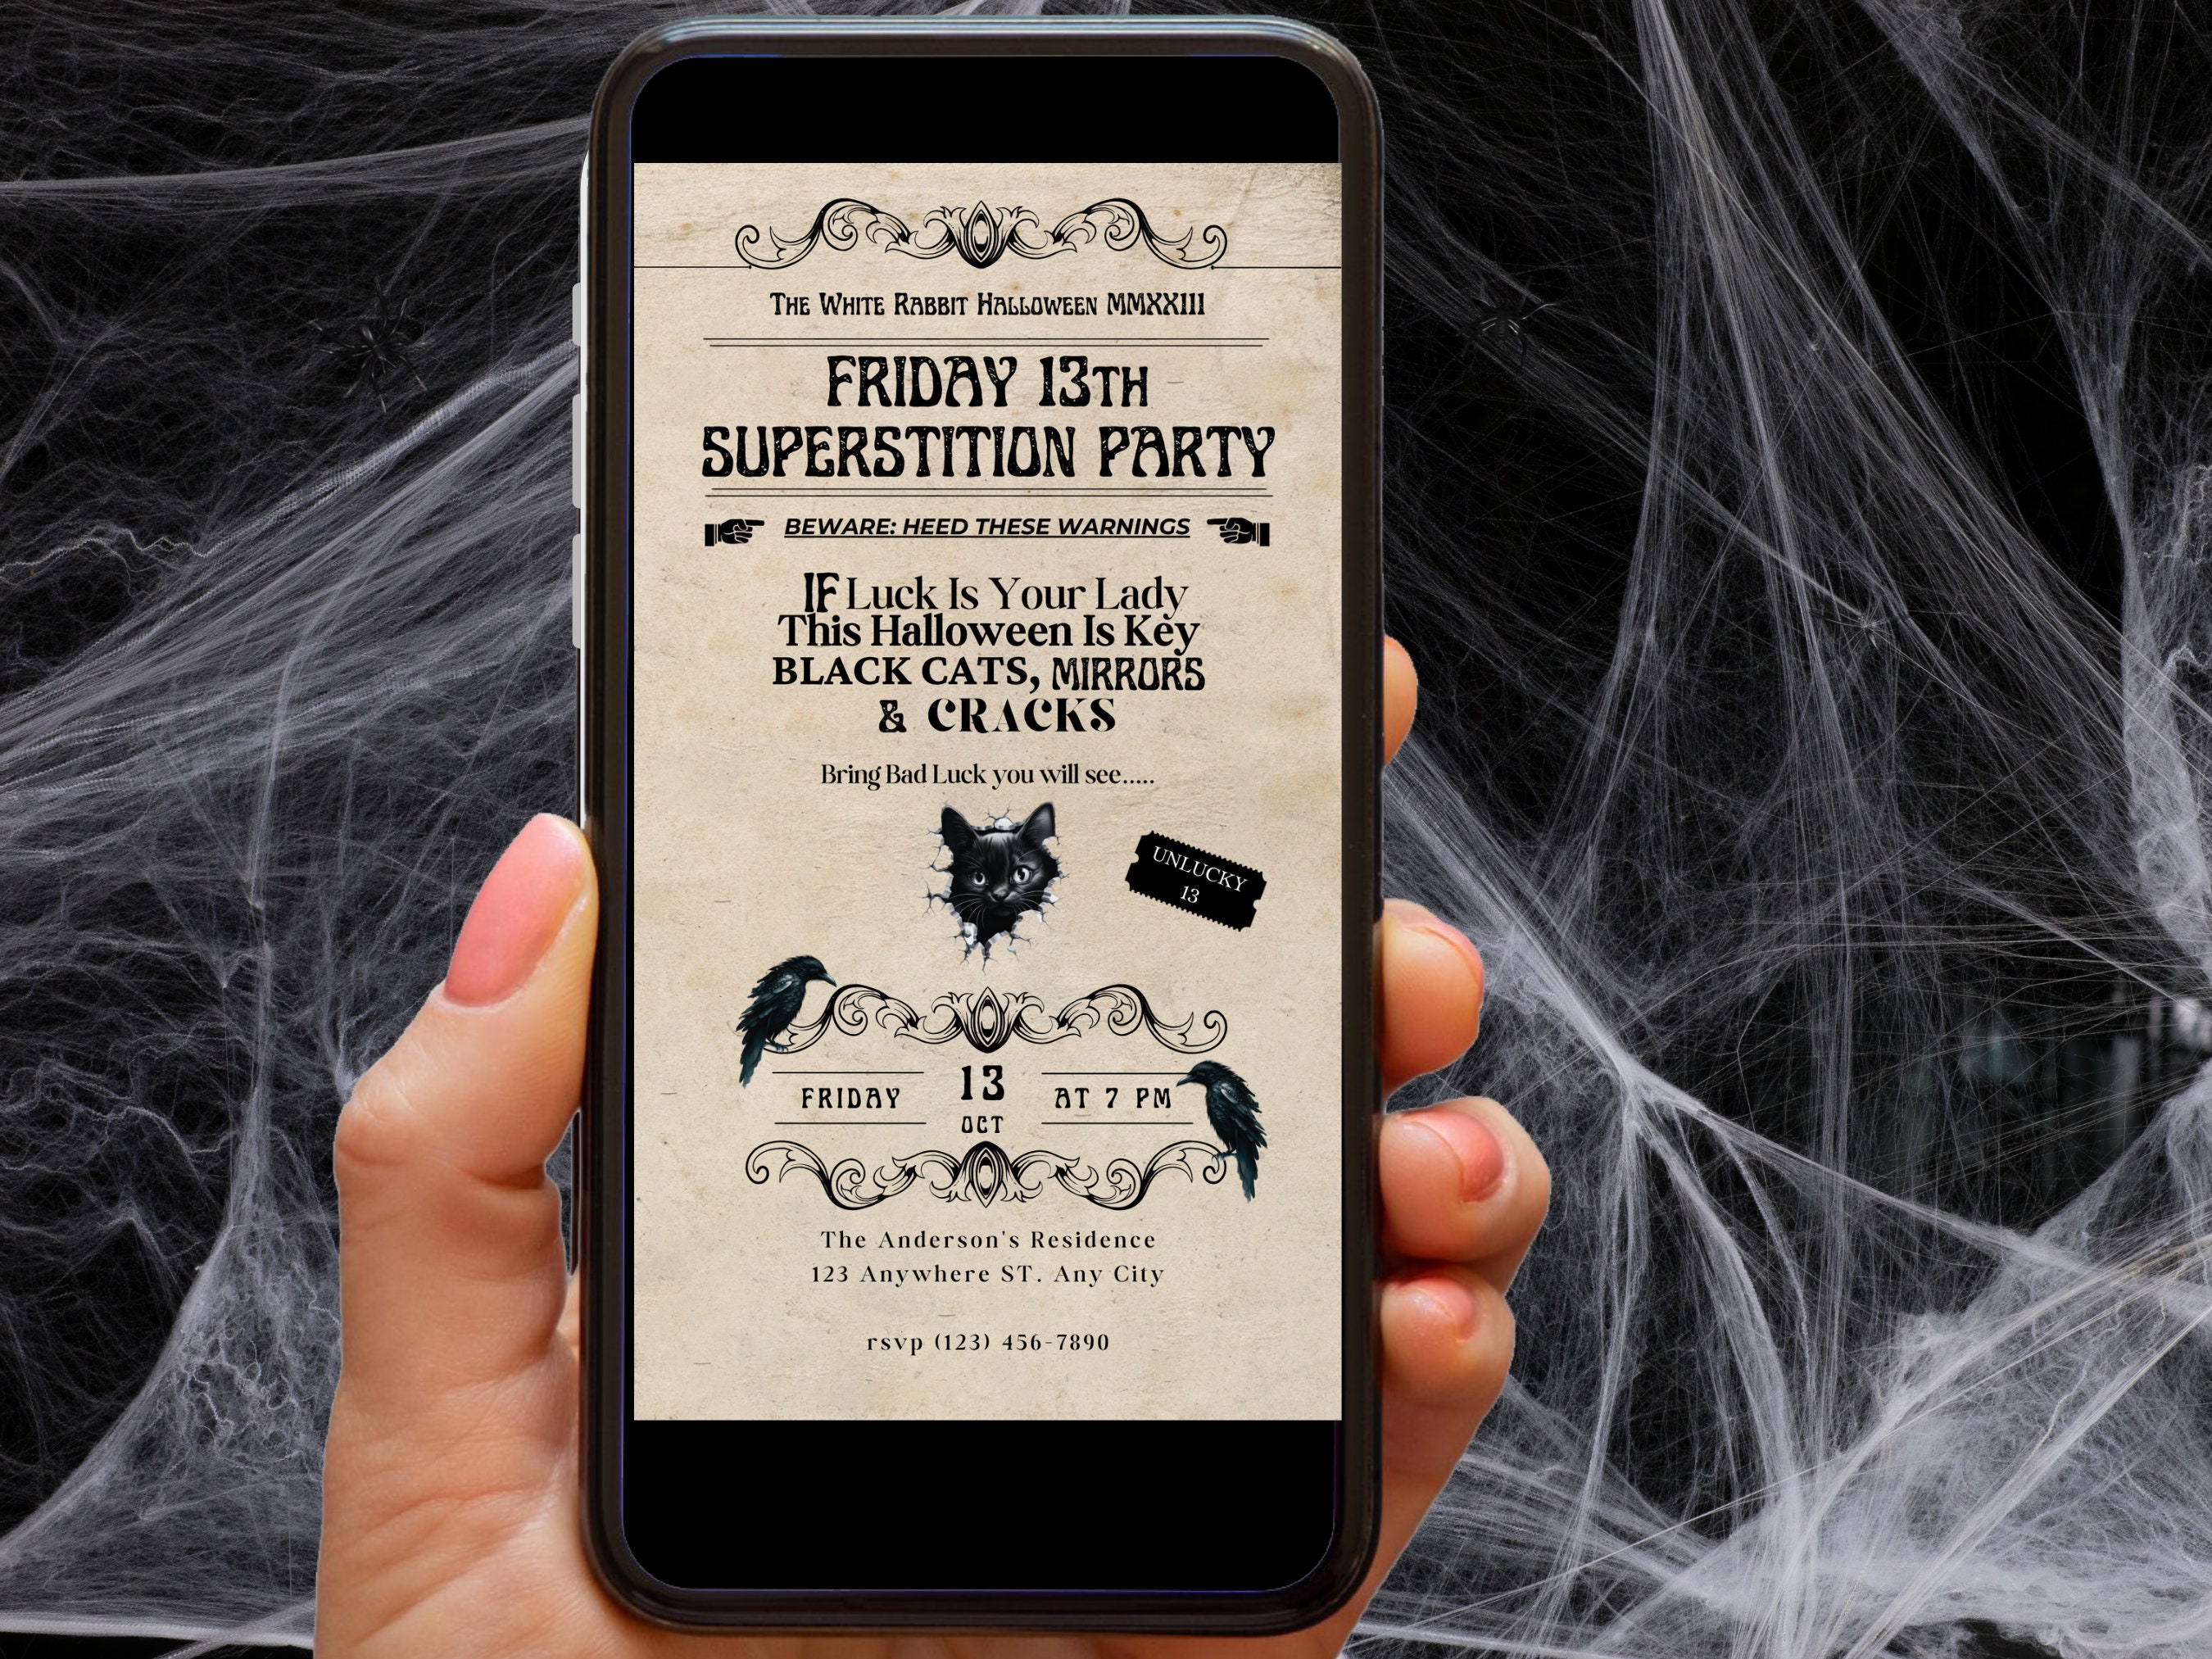 Throw a Superstition Party for Halloween or Friday the 13th